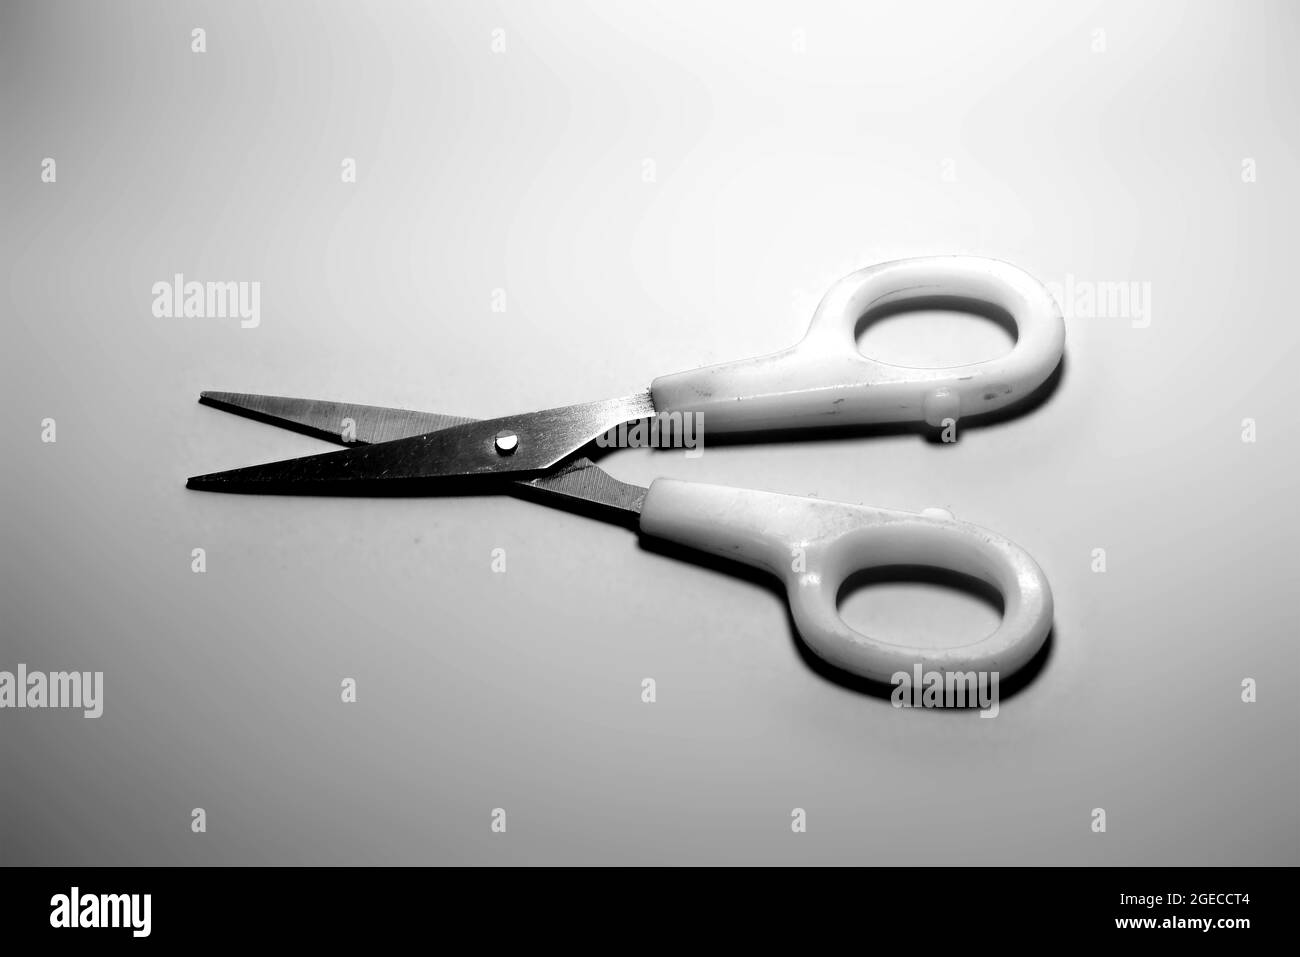 Black and white Scissors hand-operated cutting instruments. Scissors for cutting paper and thin materials on white background Stock Photo